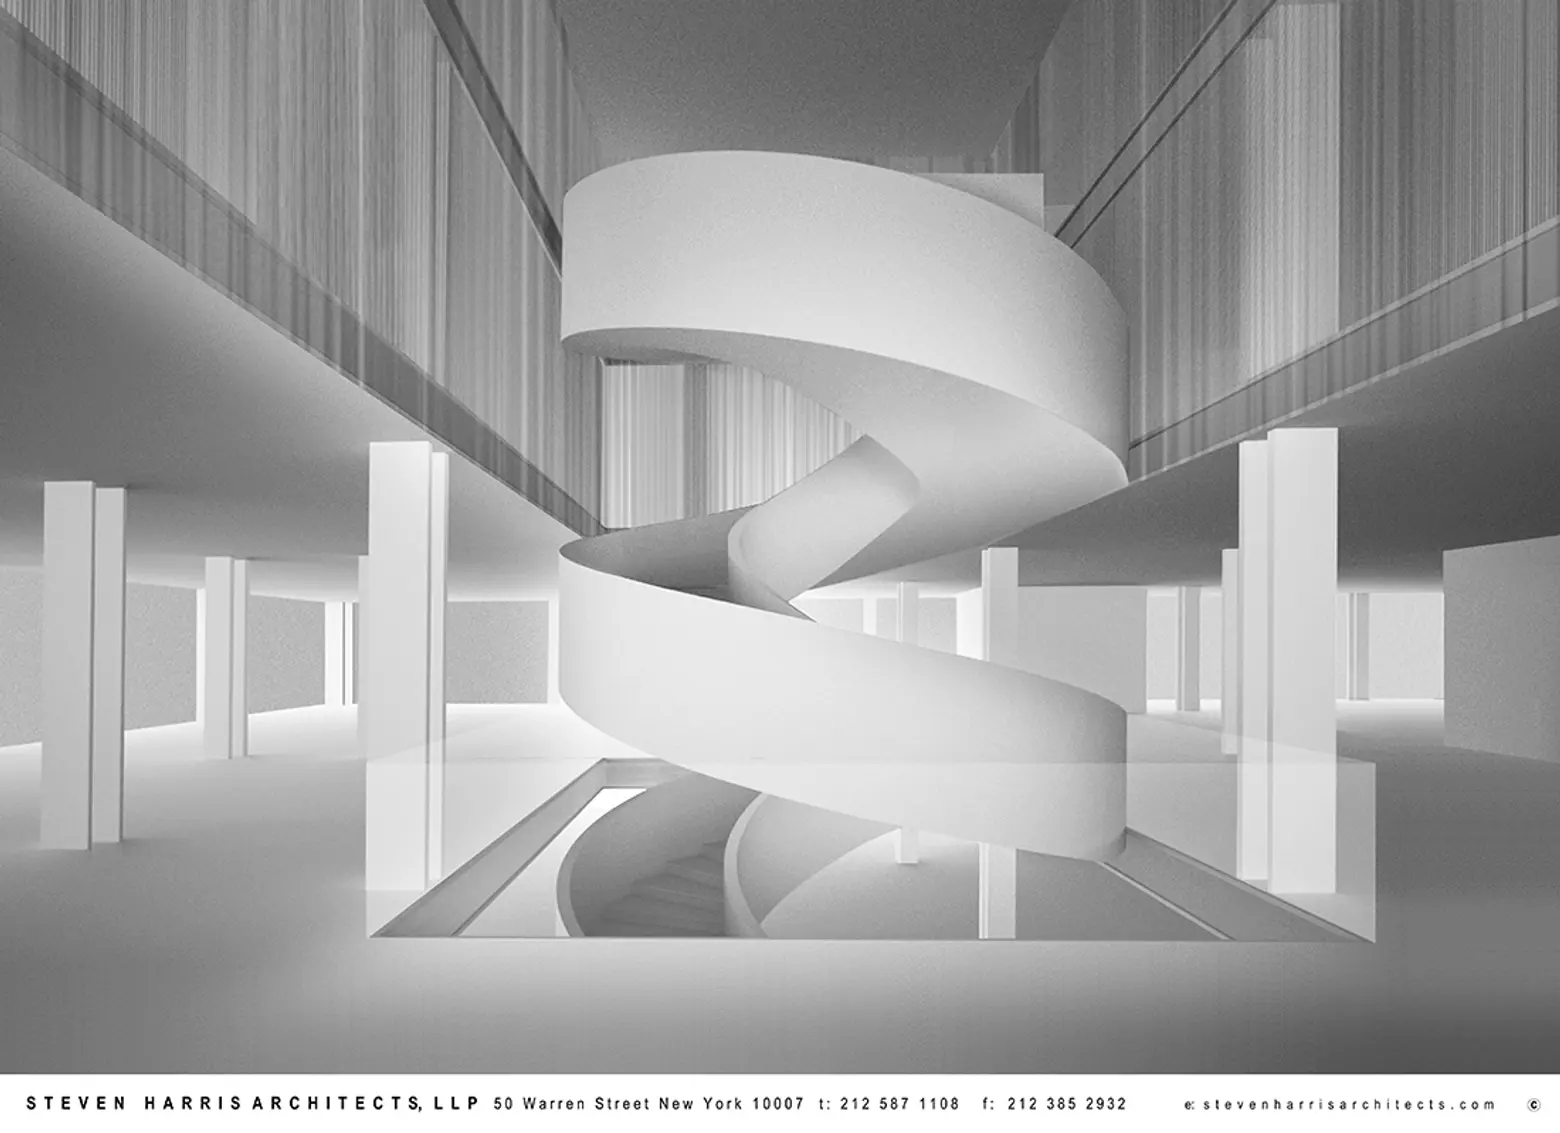 Rendering of spiral staircase for Barneys’ Chelsea flagship by Steven Harris Architects